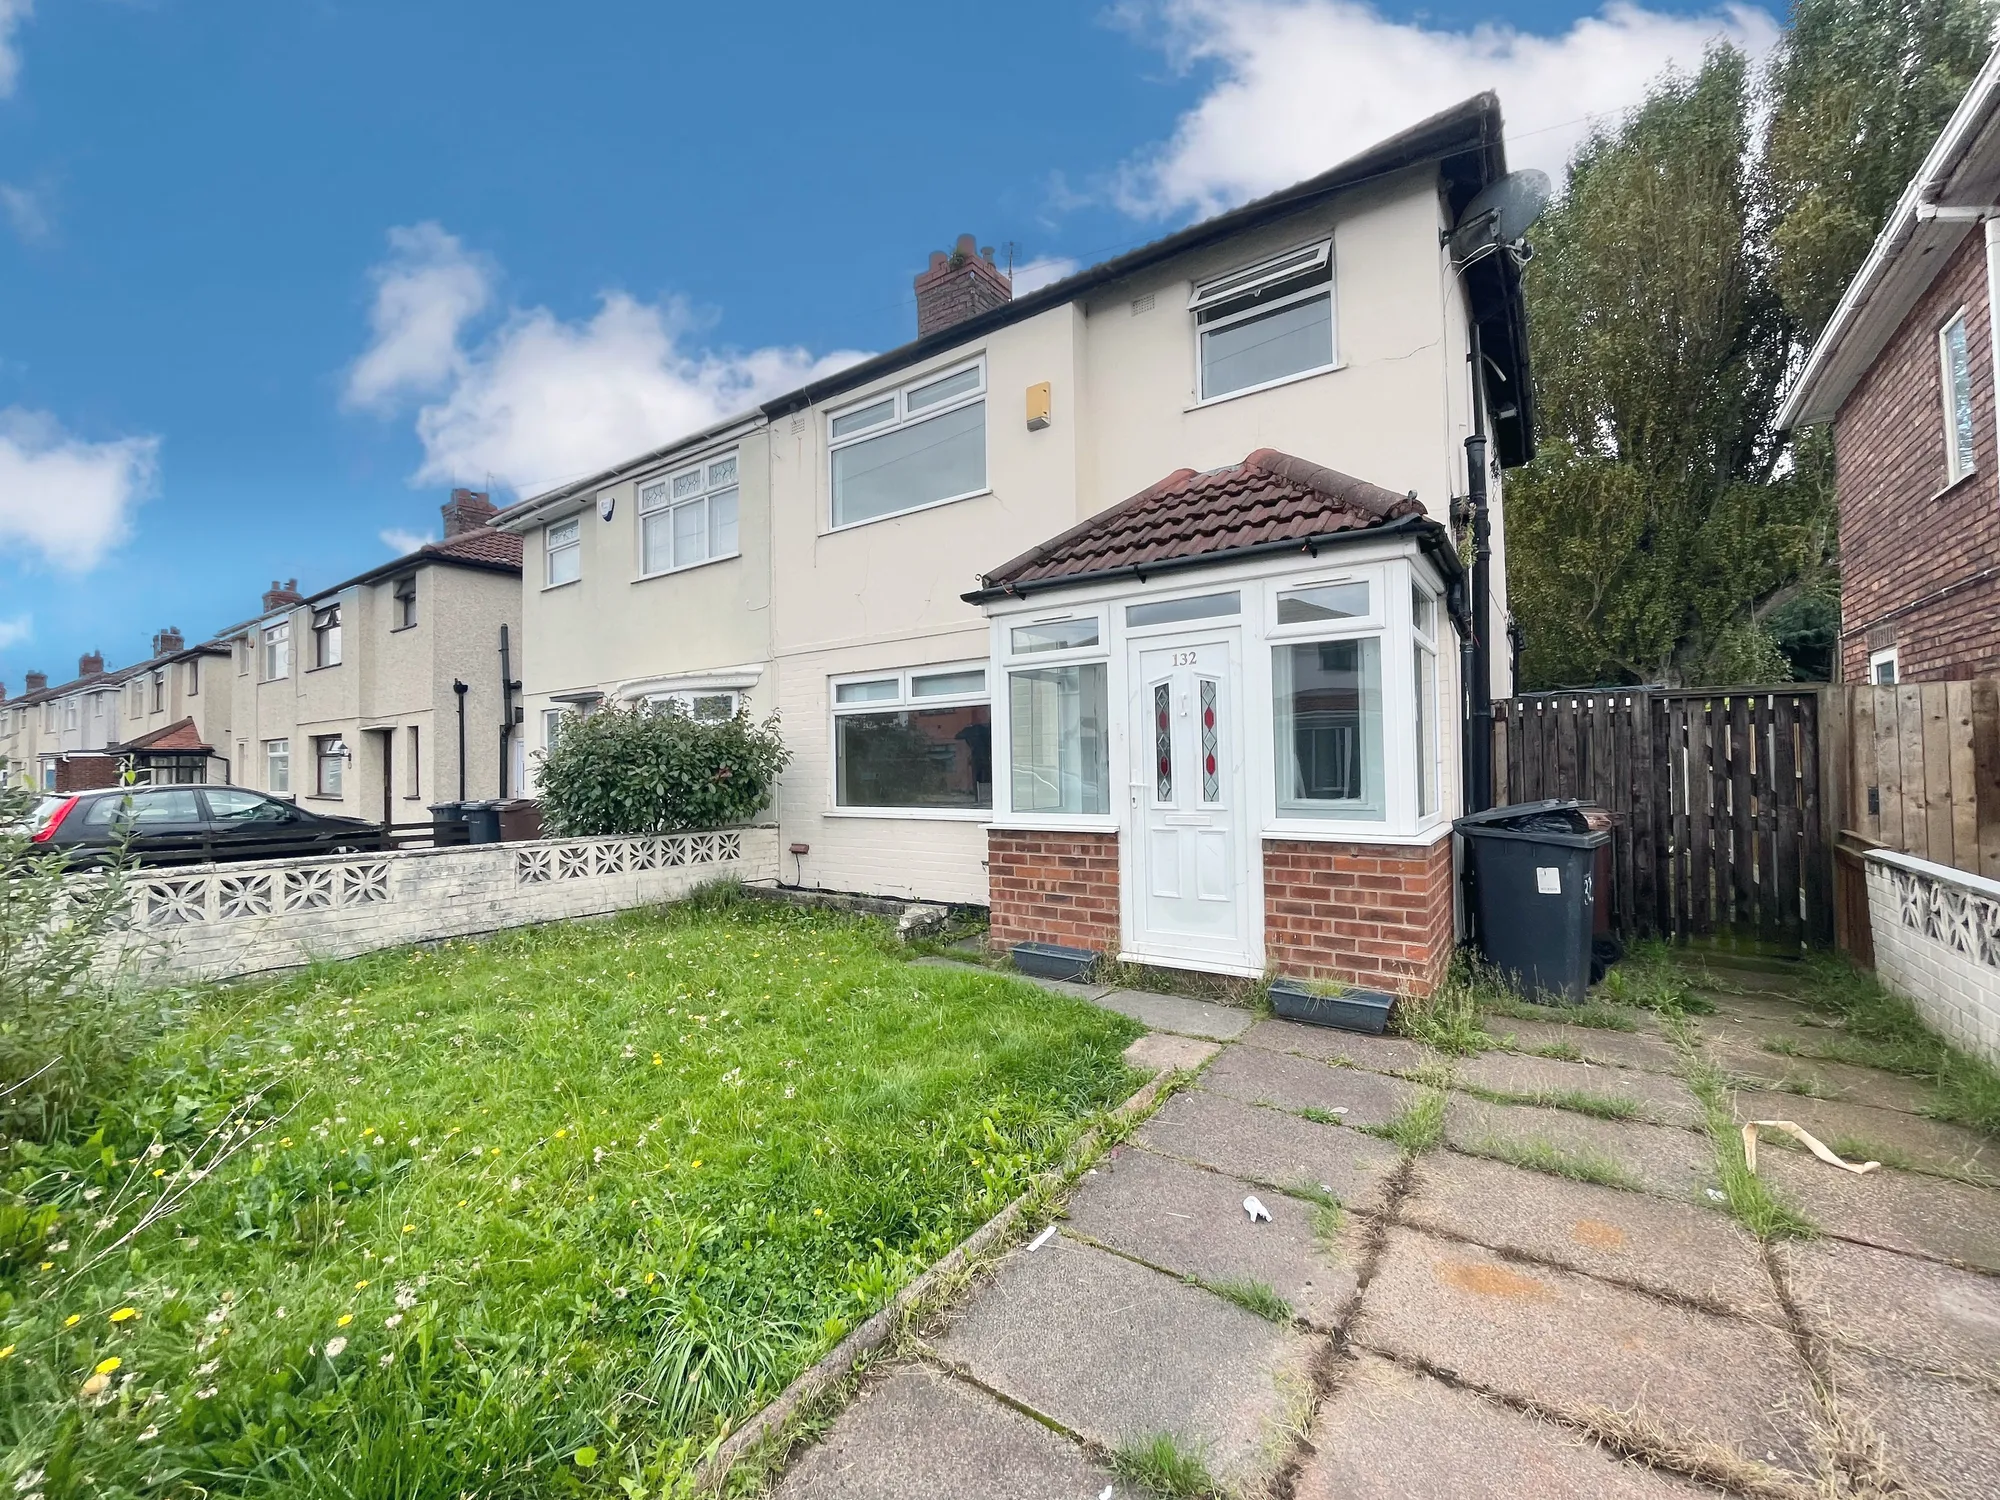 Explore this generously extended semi-detached family residence, ideally situated in Maghull. This property is now available for sale without the burden of an upward chain, offering you a smooth transition to your new home. In the catchment for well regarded schools plus convenient for motorways.